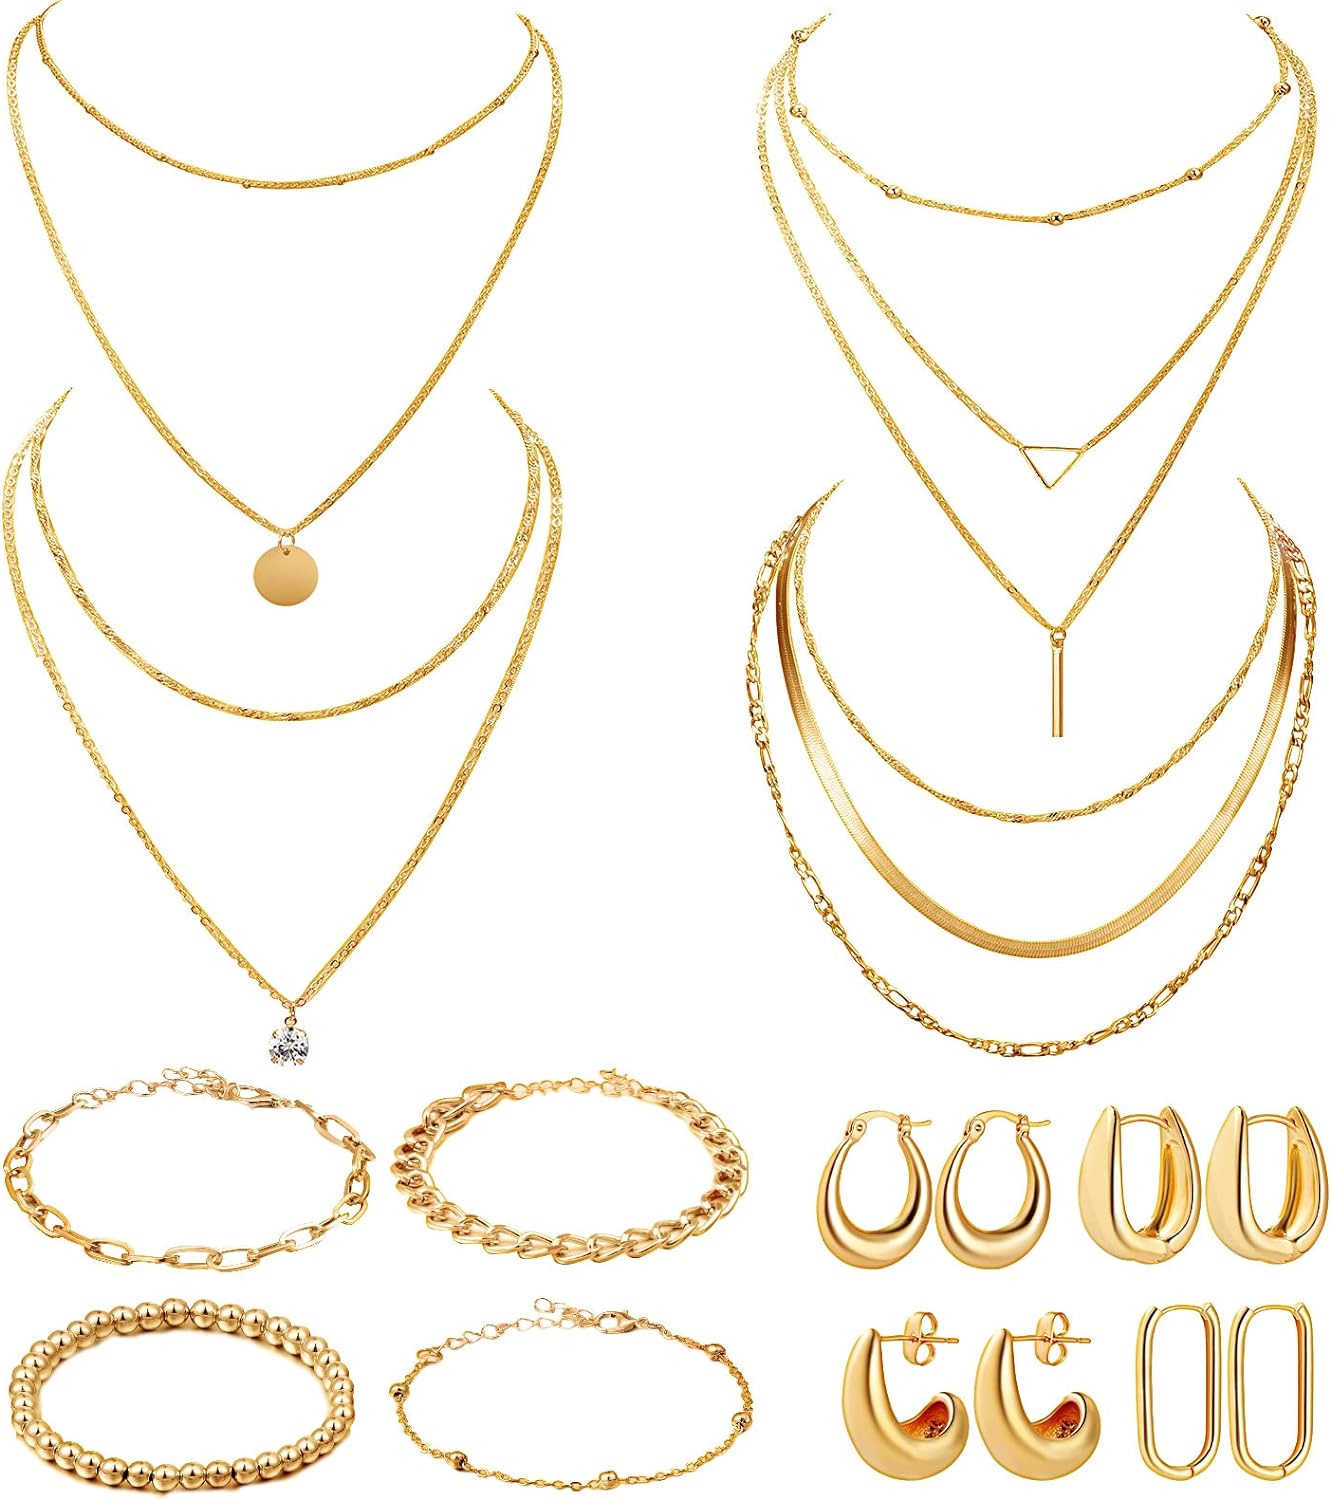 Tiamon 12 Pcs Gold Silver Jewelry Sets for Women Layered Set of Earring Necklace Bracelets for Teen Girl Men Christmas Jewelry Gifts